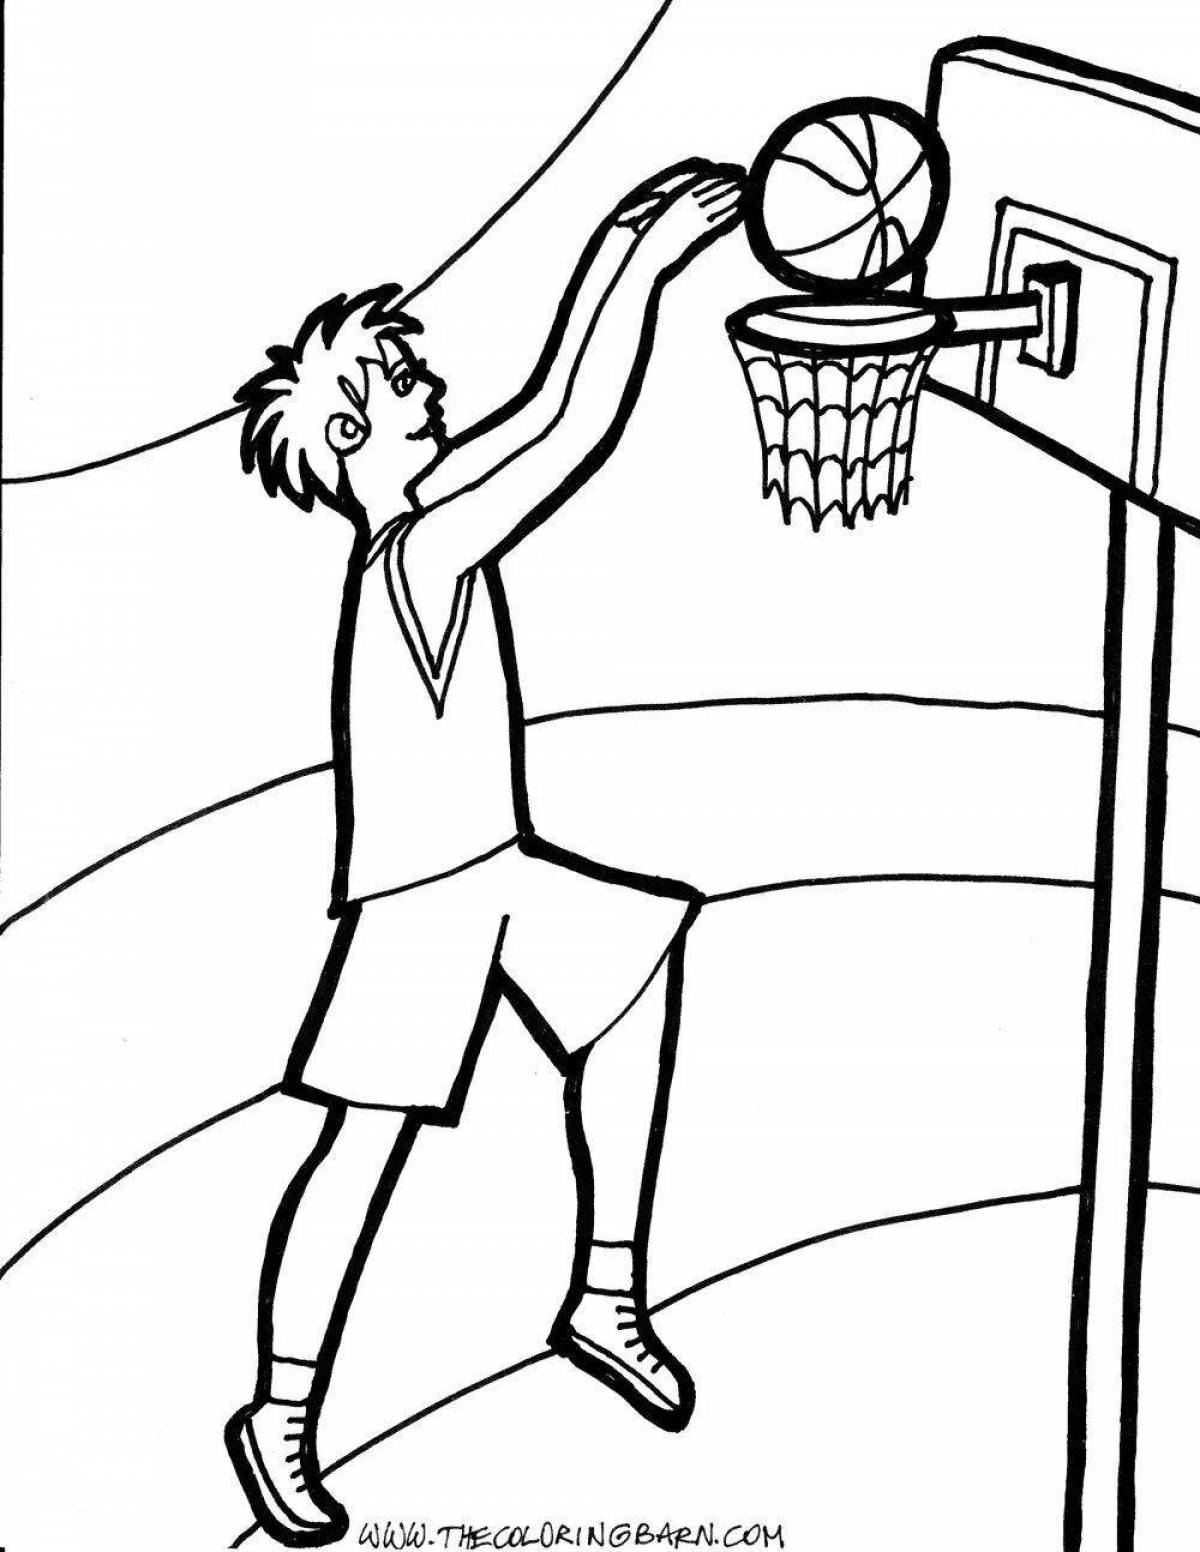 Dynamic sports games coloring page